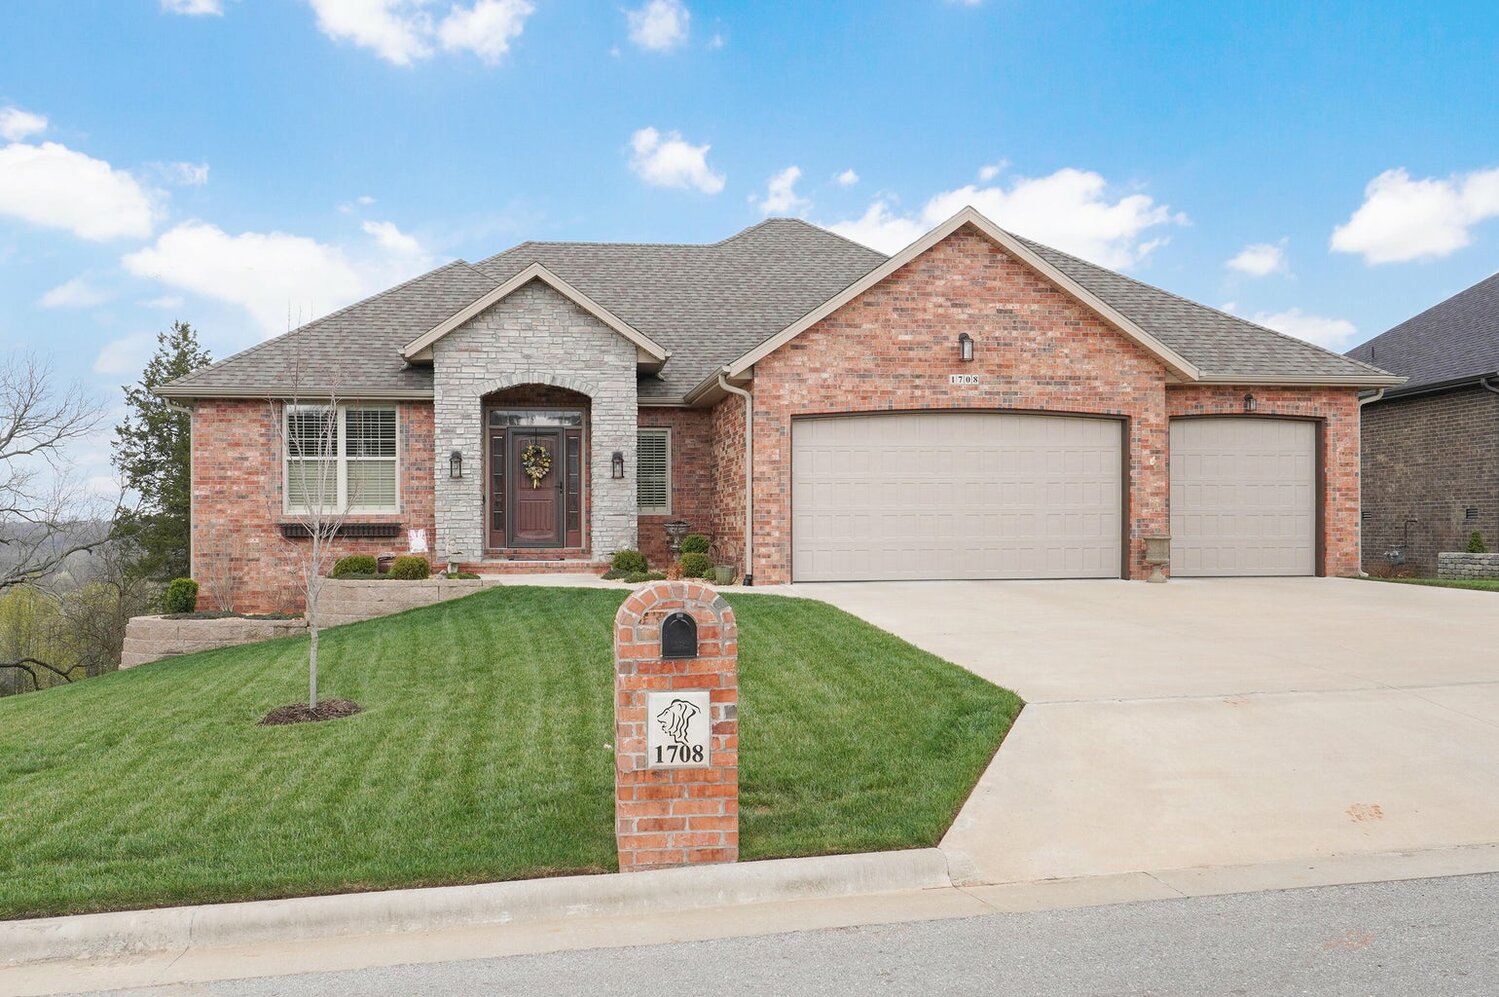 1708 W. Silver Oak Drive
$629,900
Bedrooms: 5
Bathrooms: 4
Listing firm: Old World Realty LLC